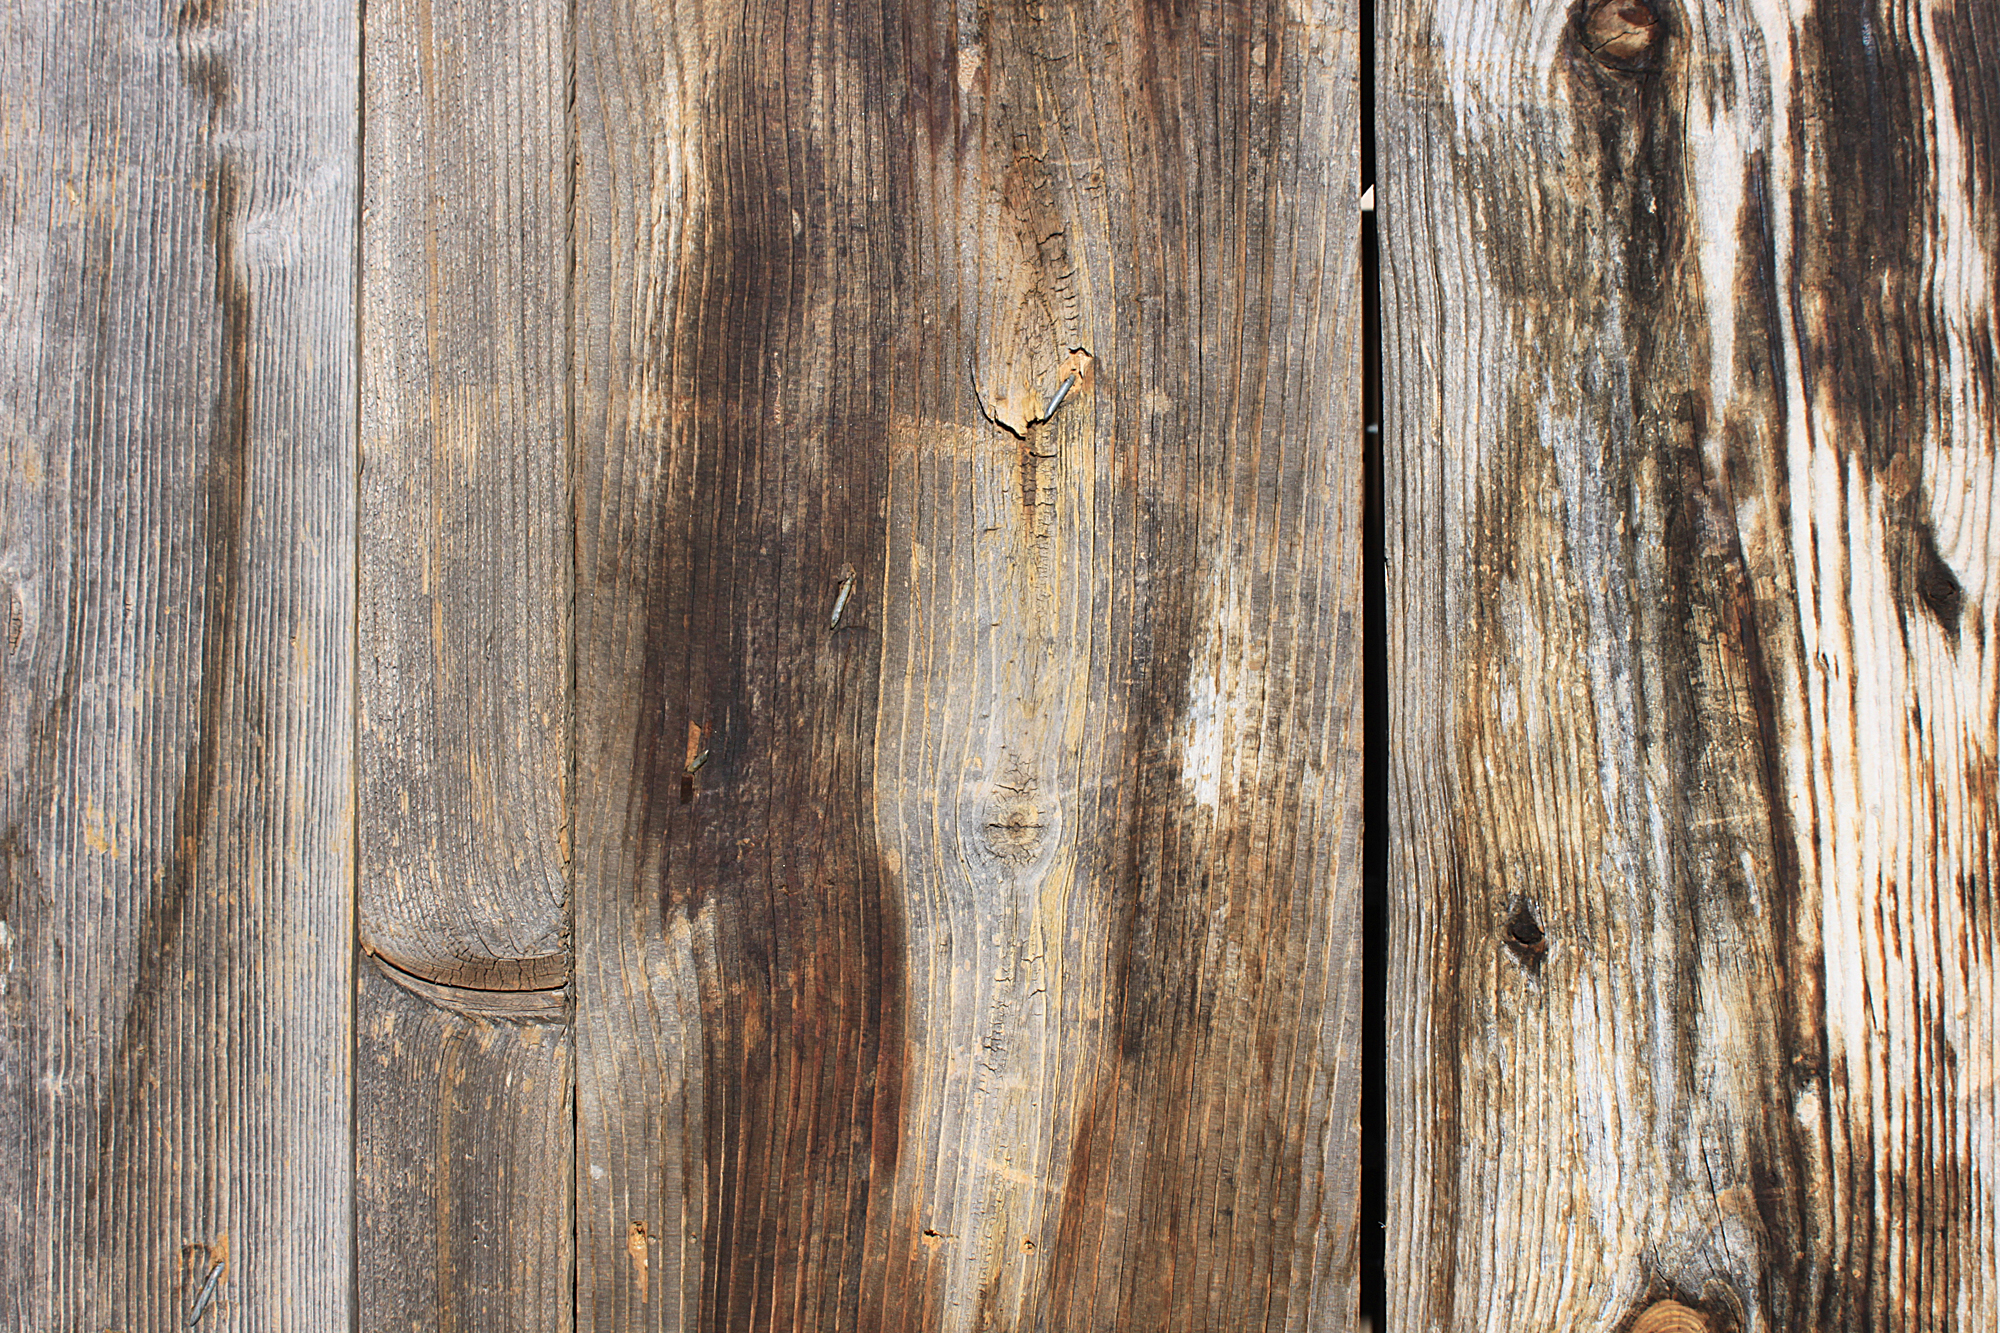 Rustic Wooden Background With Stains Stock Image Liligraphie Pictures 2000x1333